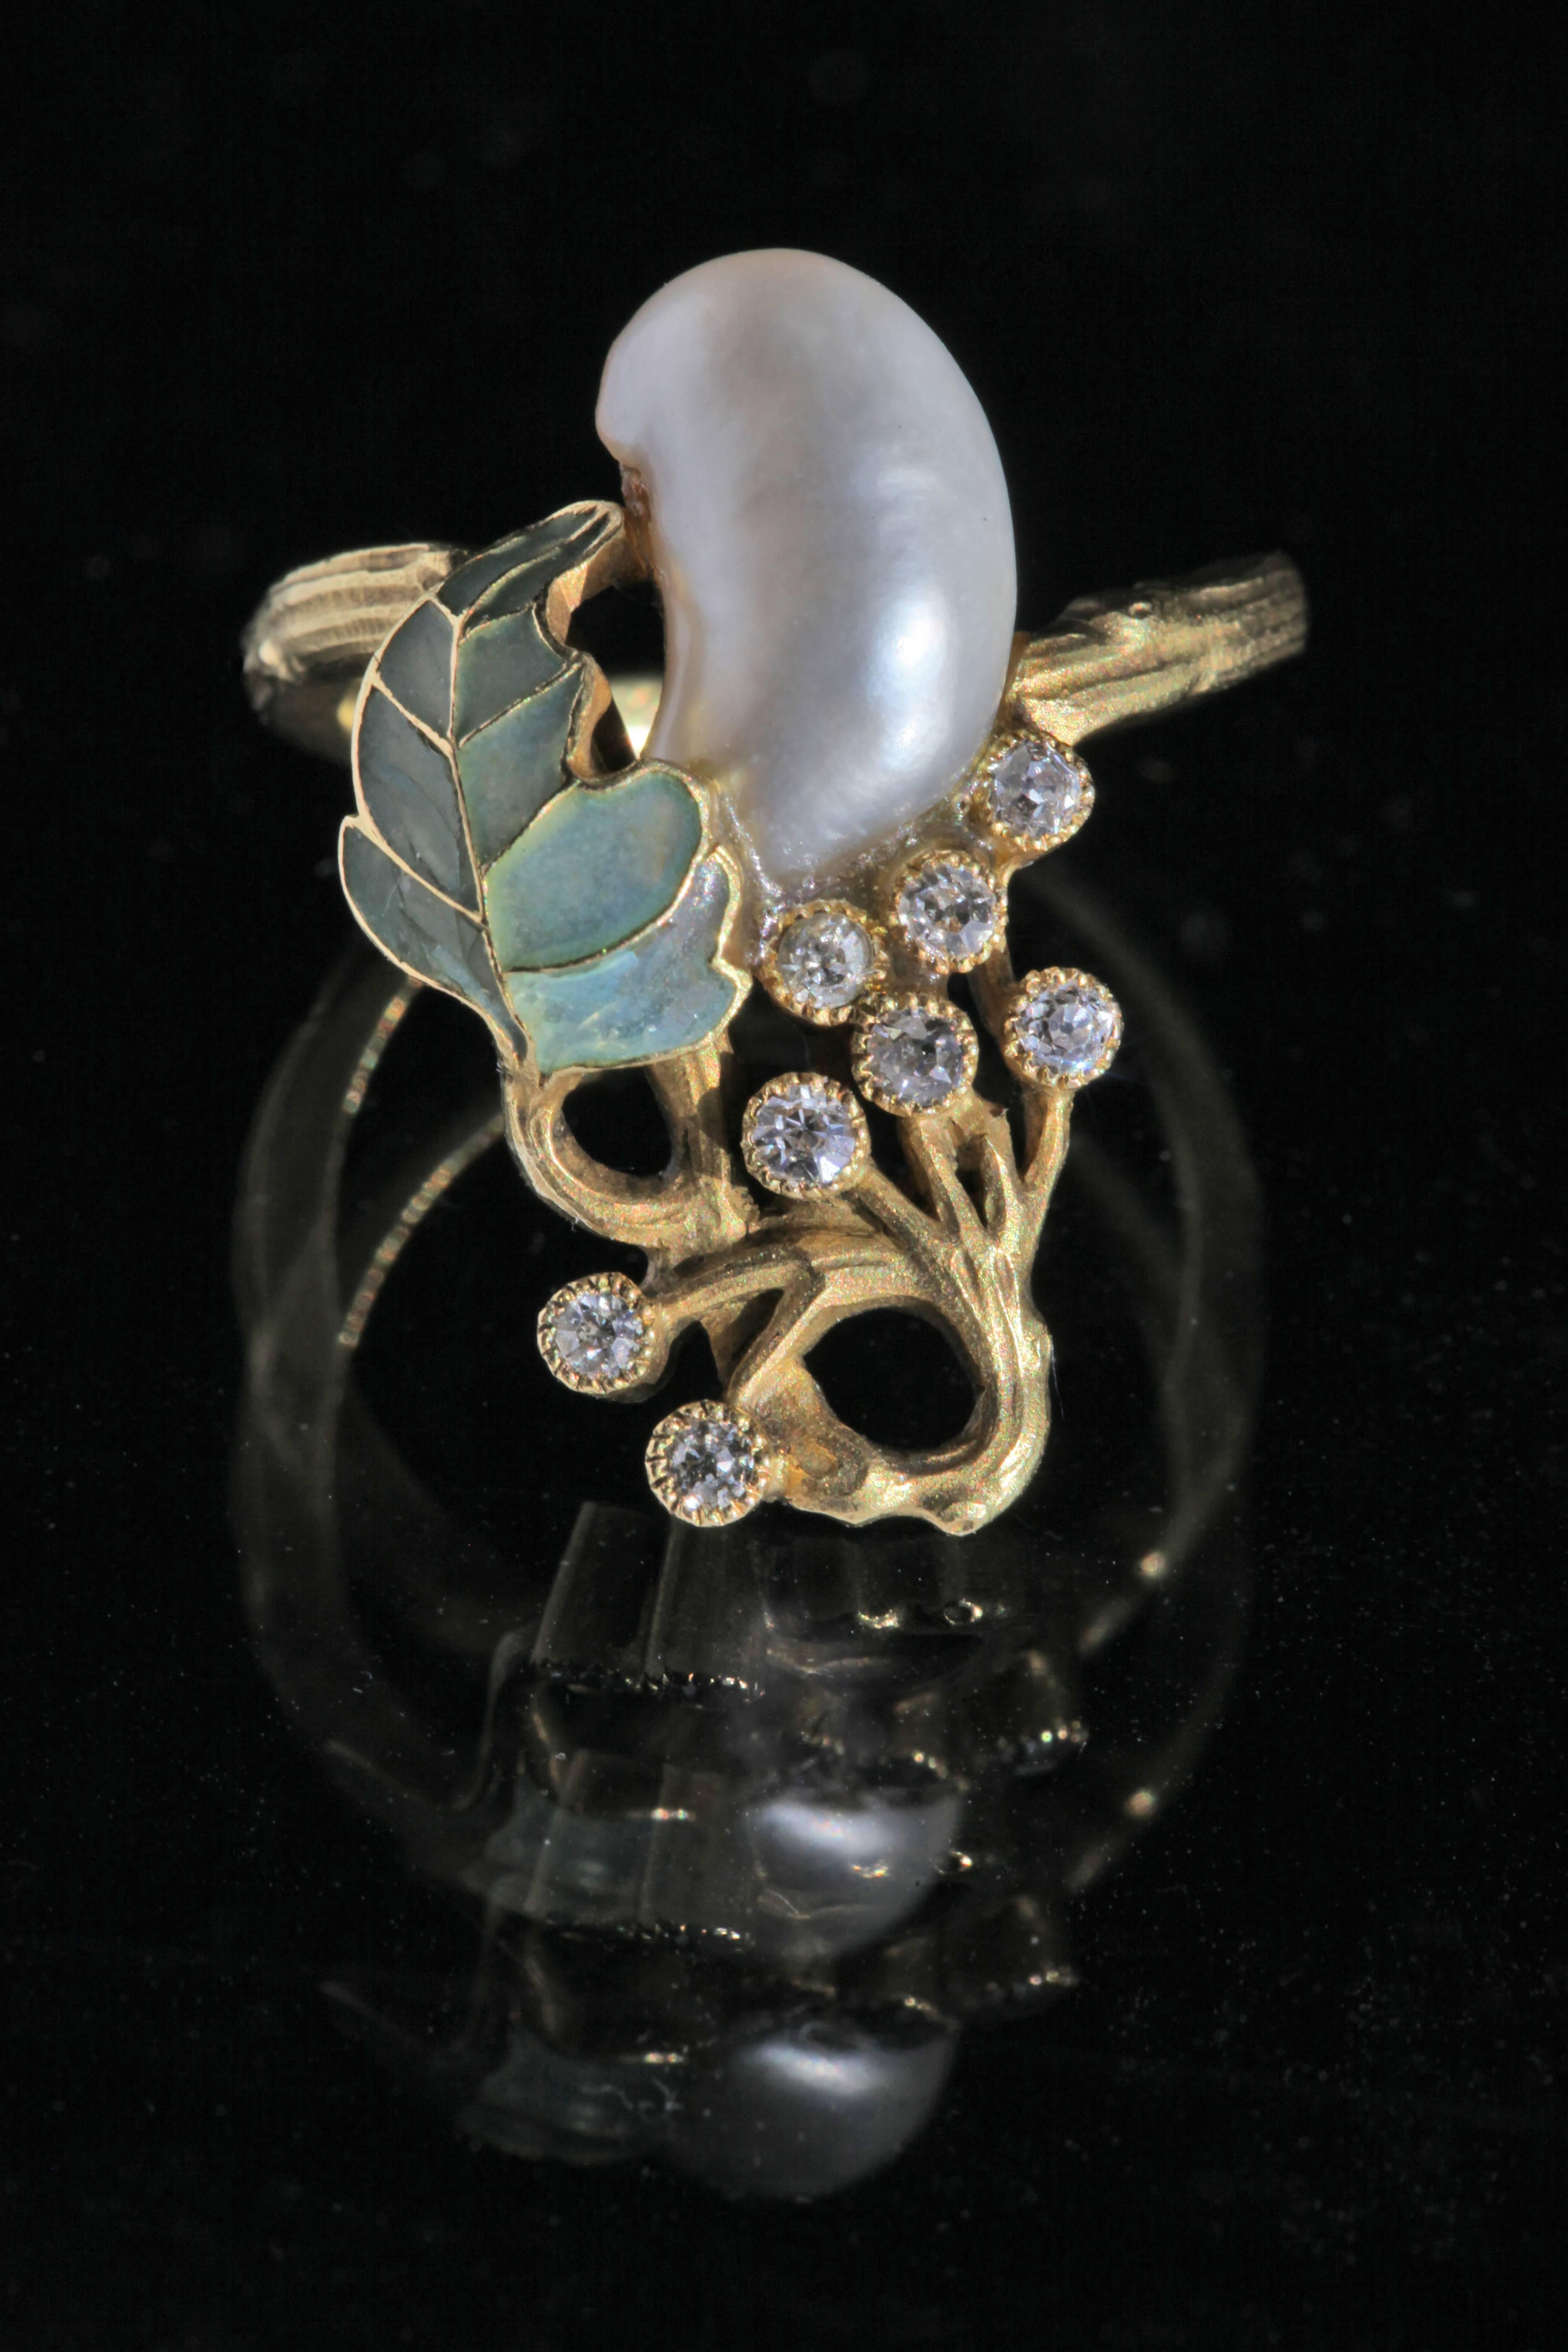 An exceptional Japonisme inspired ring
The baroque-shaped natural pearl measuring approximately 11.3 x 7.6 mm.
Illustrated in our book:
Beatriz Chadour-Sampson & Sonya Newell-Smith, Tadema Gallery London Jewellery from the 1860s to 1960s, Arnoldsche